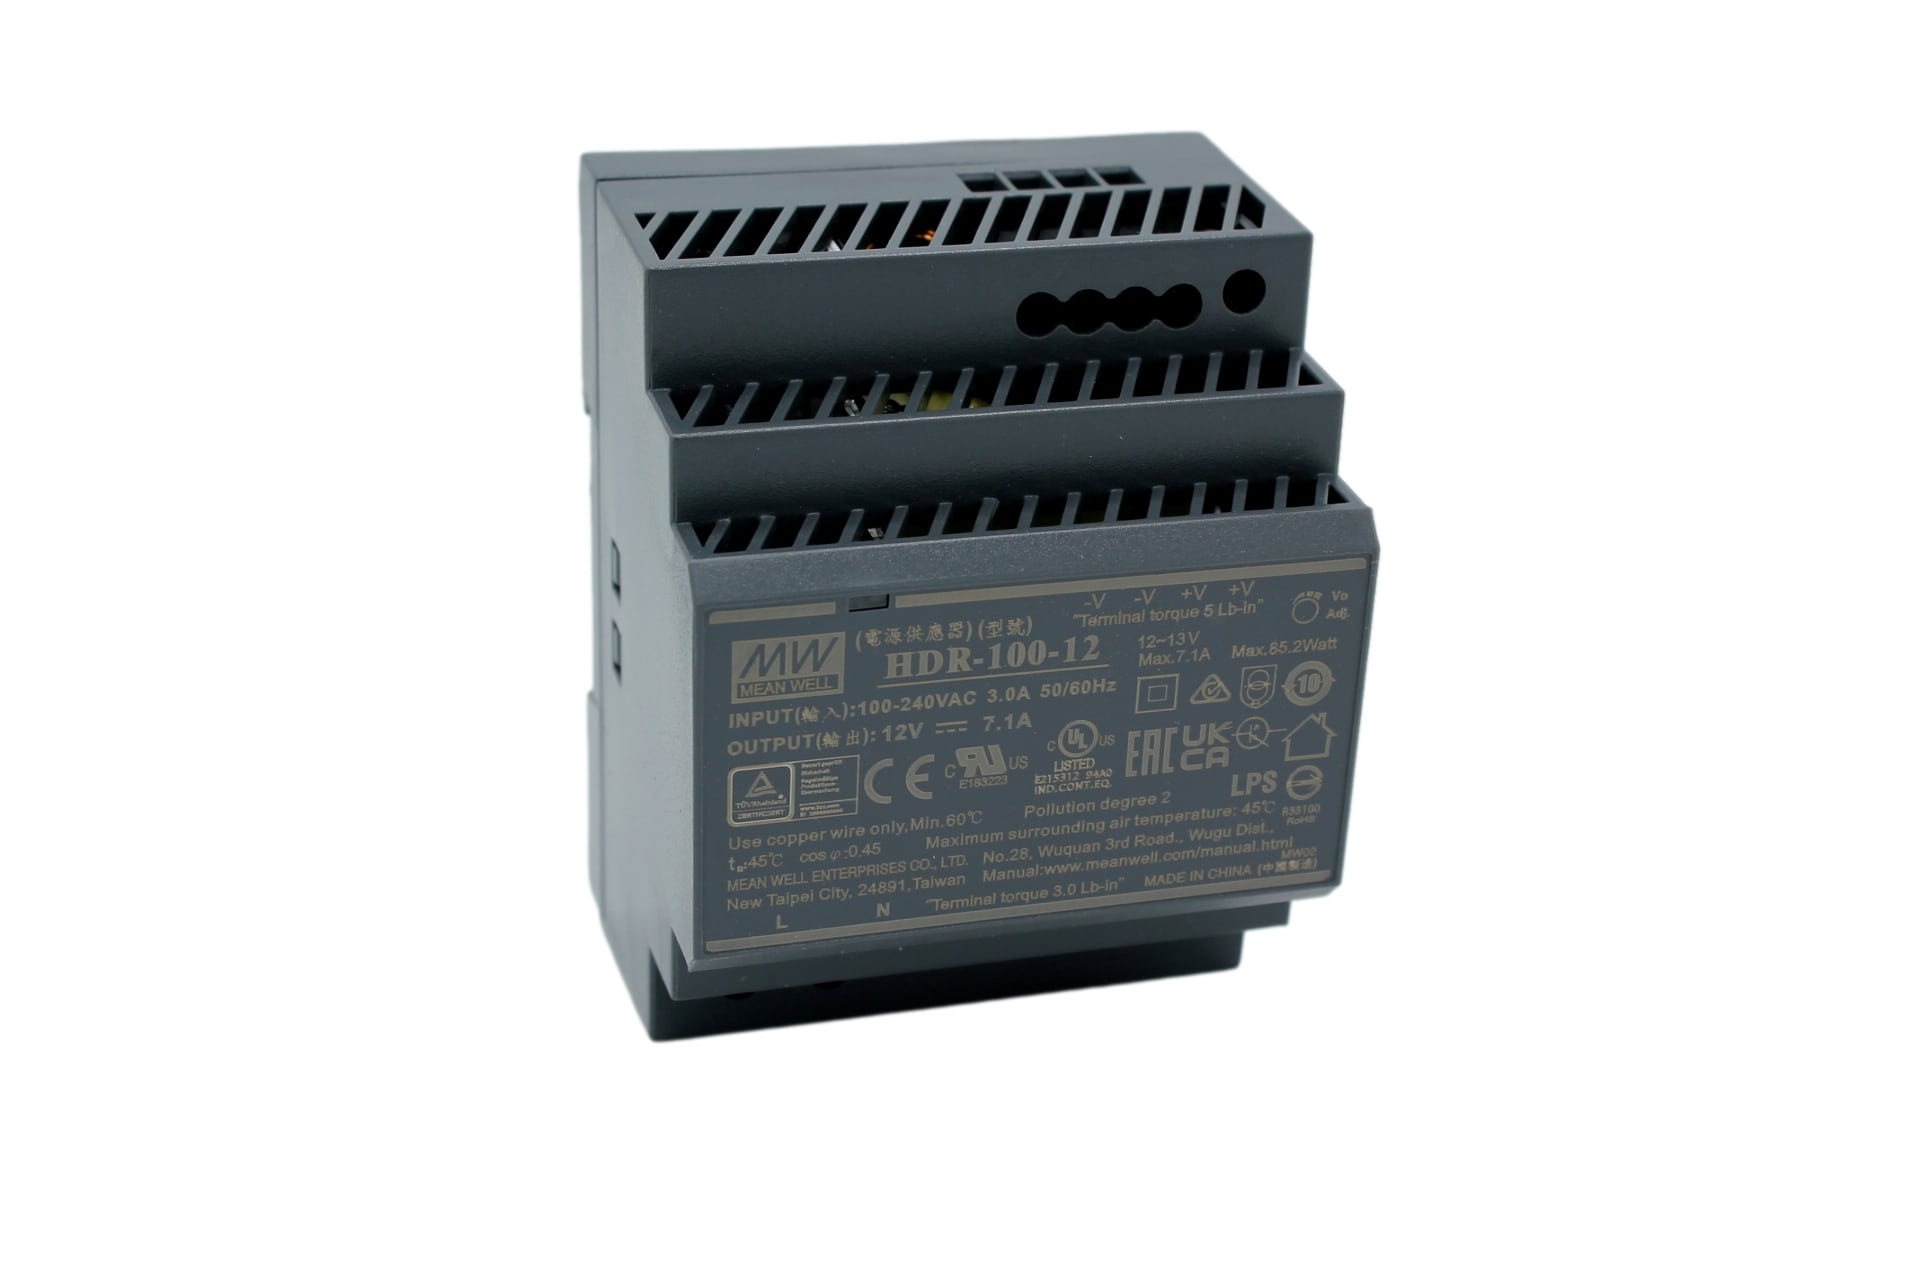 HDR-100-12 DIN rail power supply, 85.2W, 12V, 7.1A, MEAN WELL